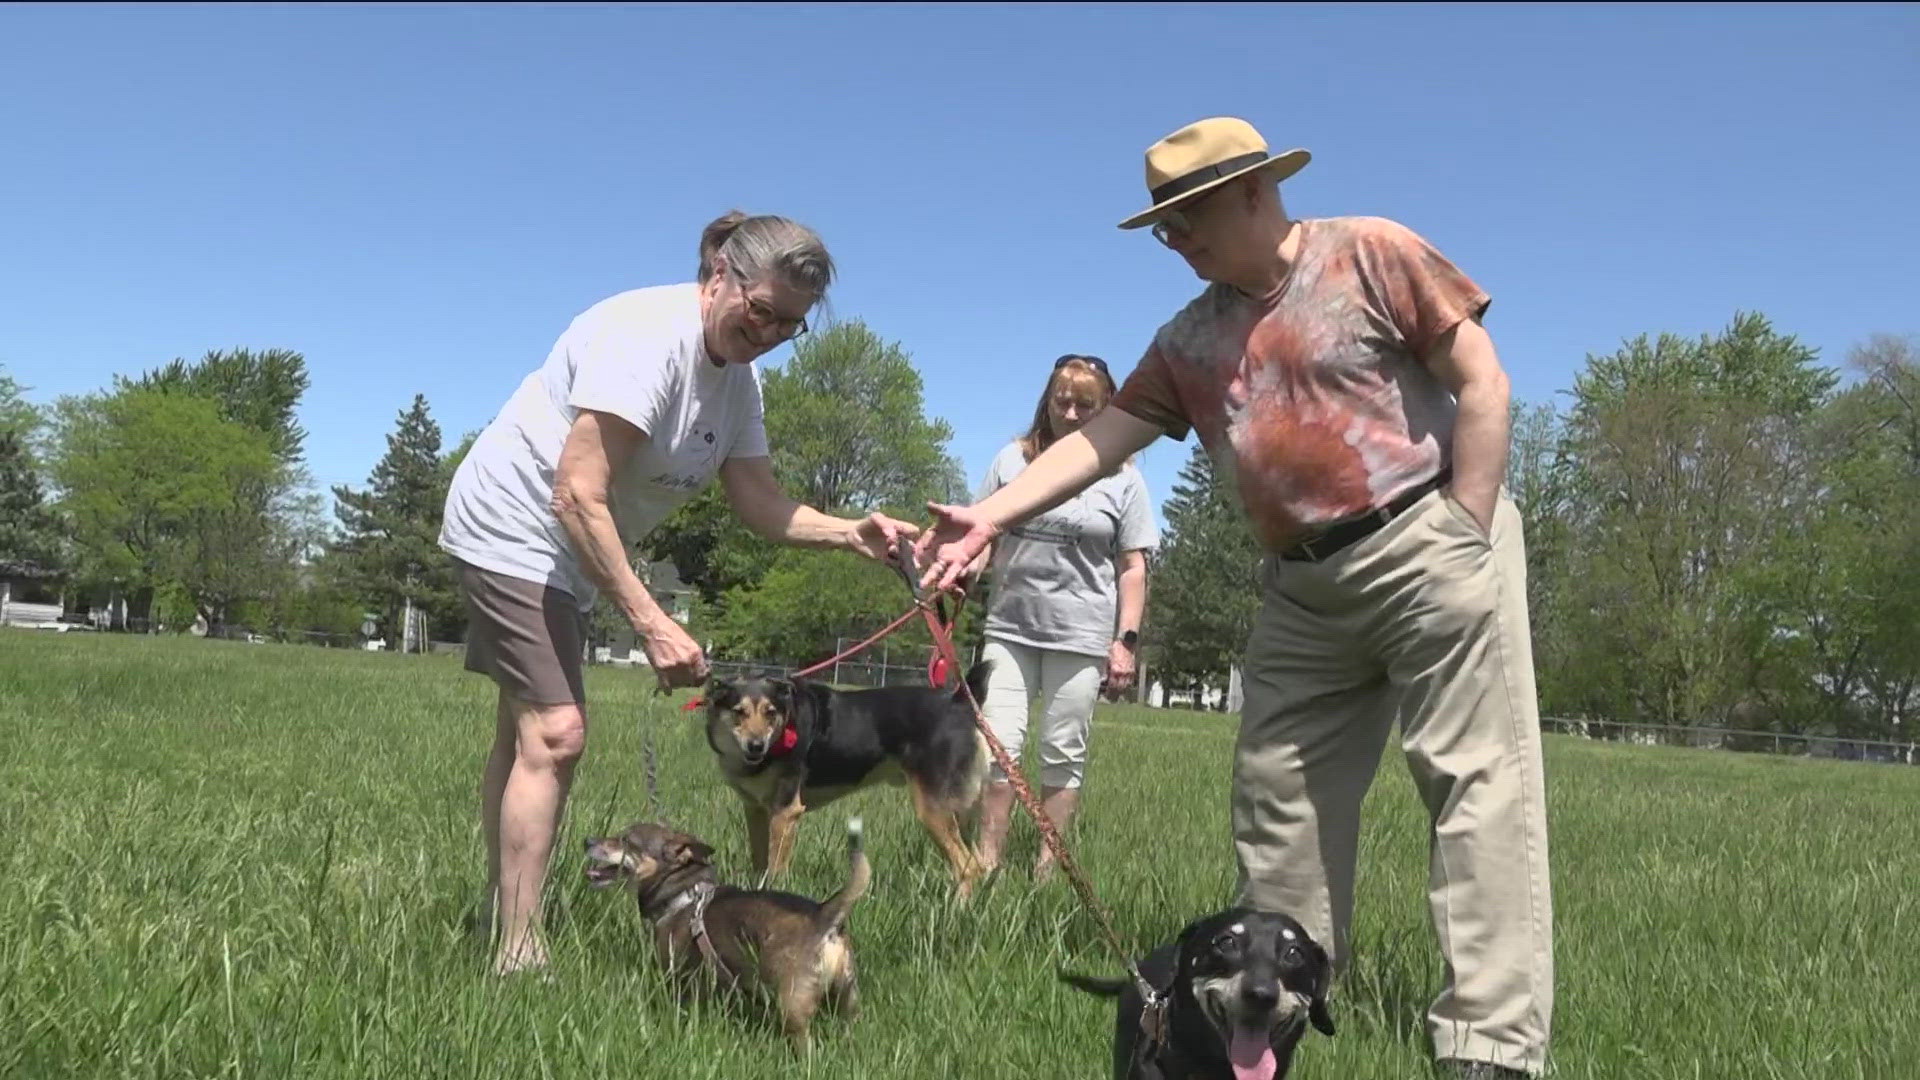 On Tuesday, Bowling Green City Council approved the lease of the northern portion of Ridge Park to become a city dog park.